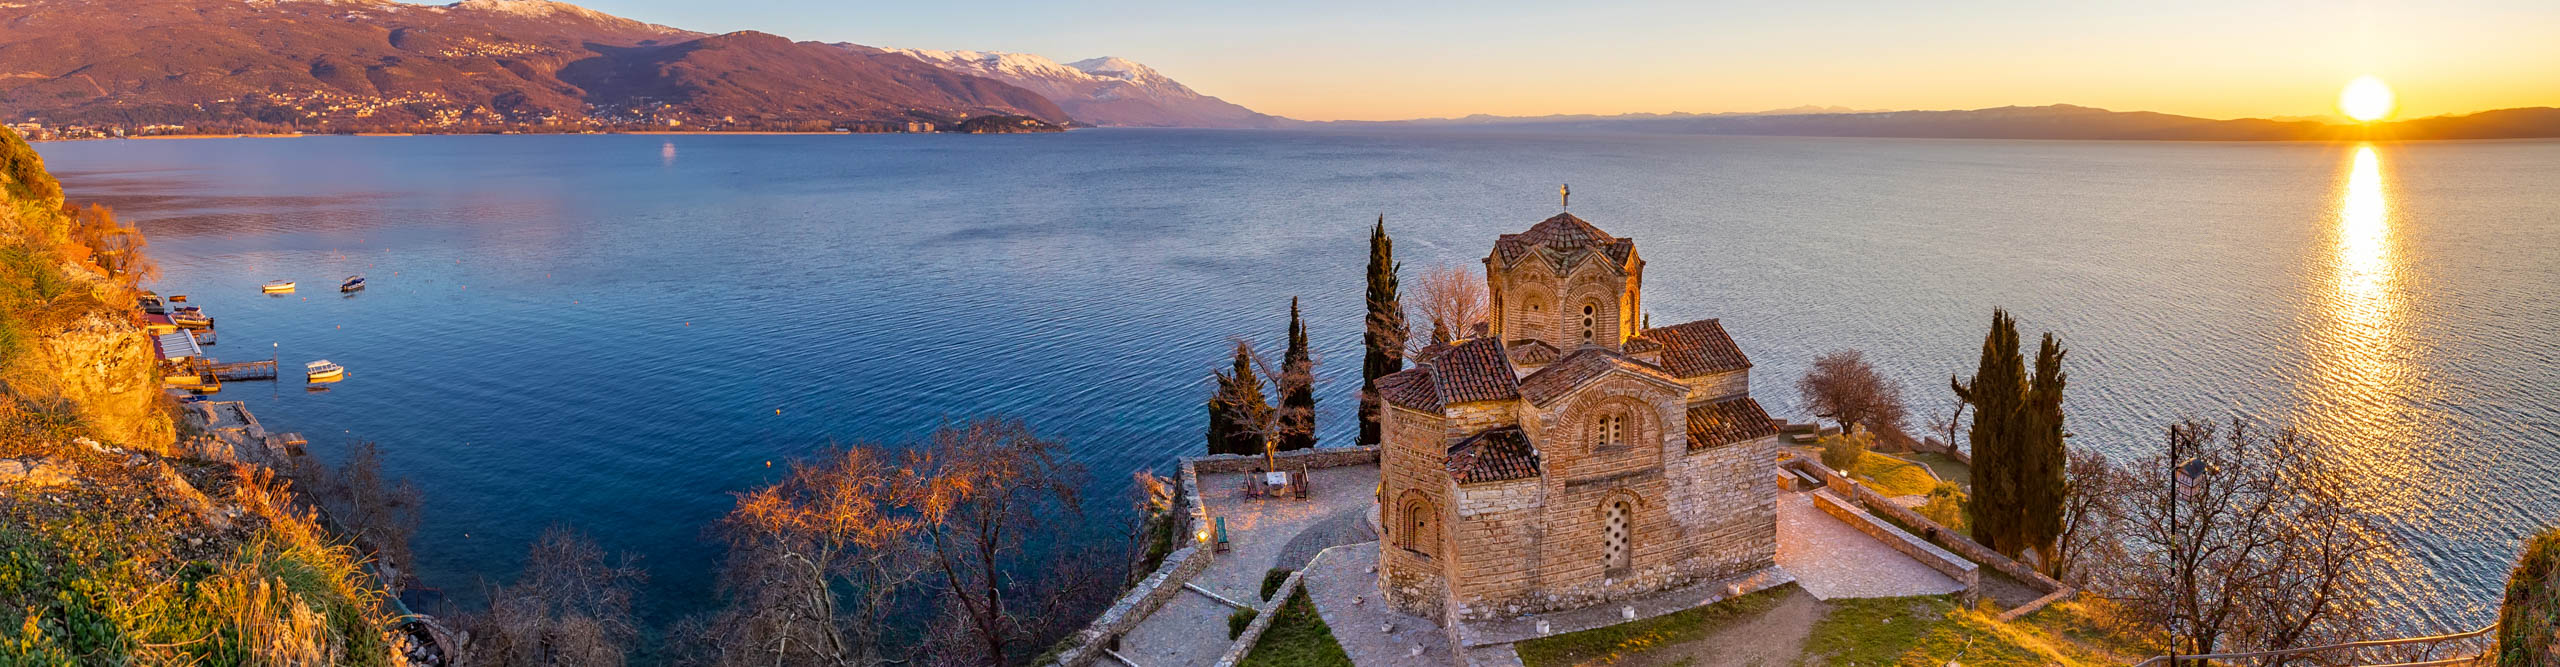 Sunset view of the Church of St John the Theologian at Kaneo with blue lake Ohrid, North Macedonia